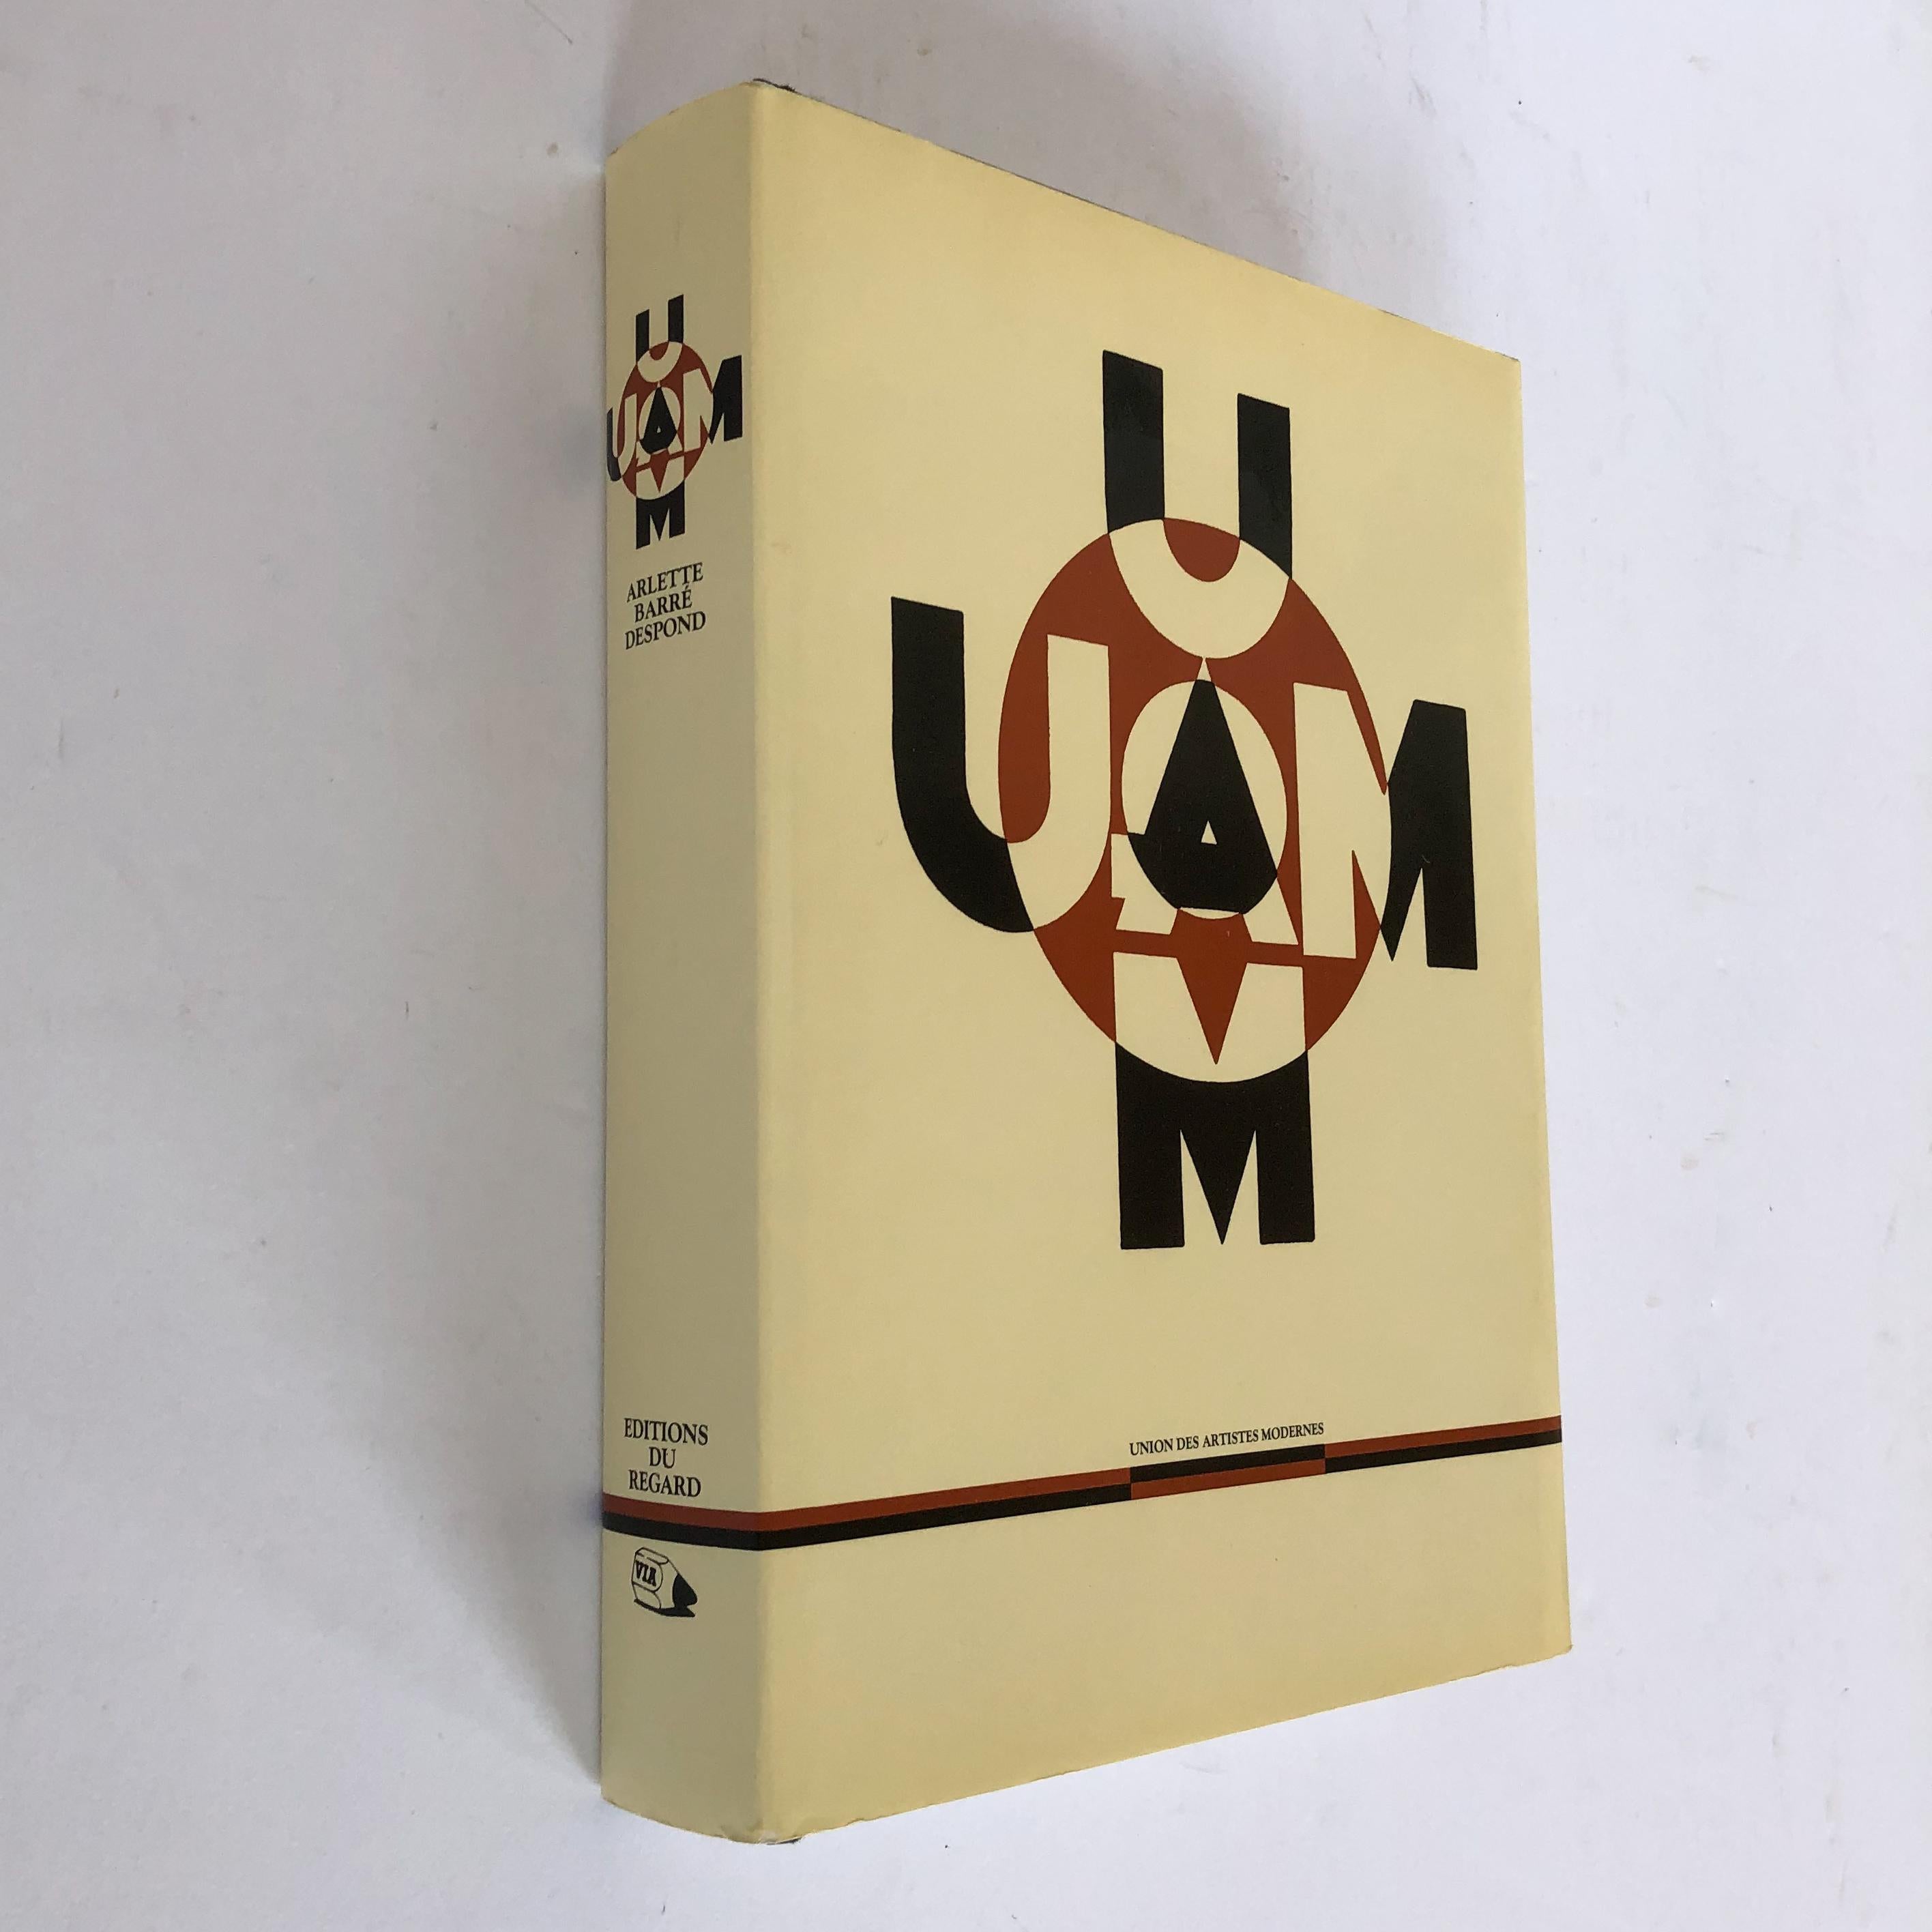 Massive 575-page monograph by Arlene Barre-Despond on the work of members of UAM, including architecture, furniture, and decorative arts. Features work by luminaries such as Pierre Chareau, Eileen Gray, Rene Herbst, Le Corbusier, Robert